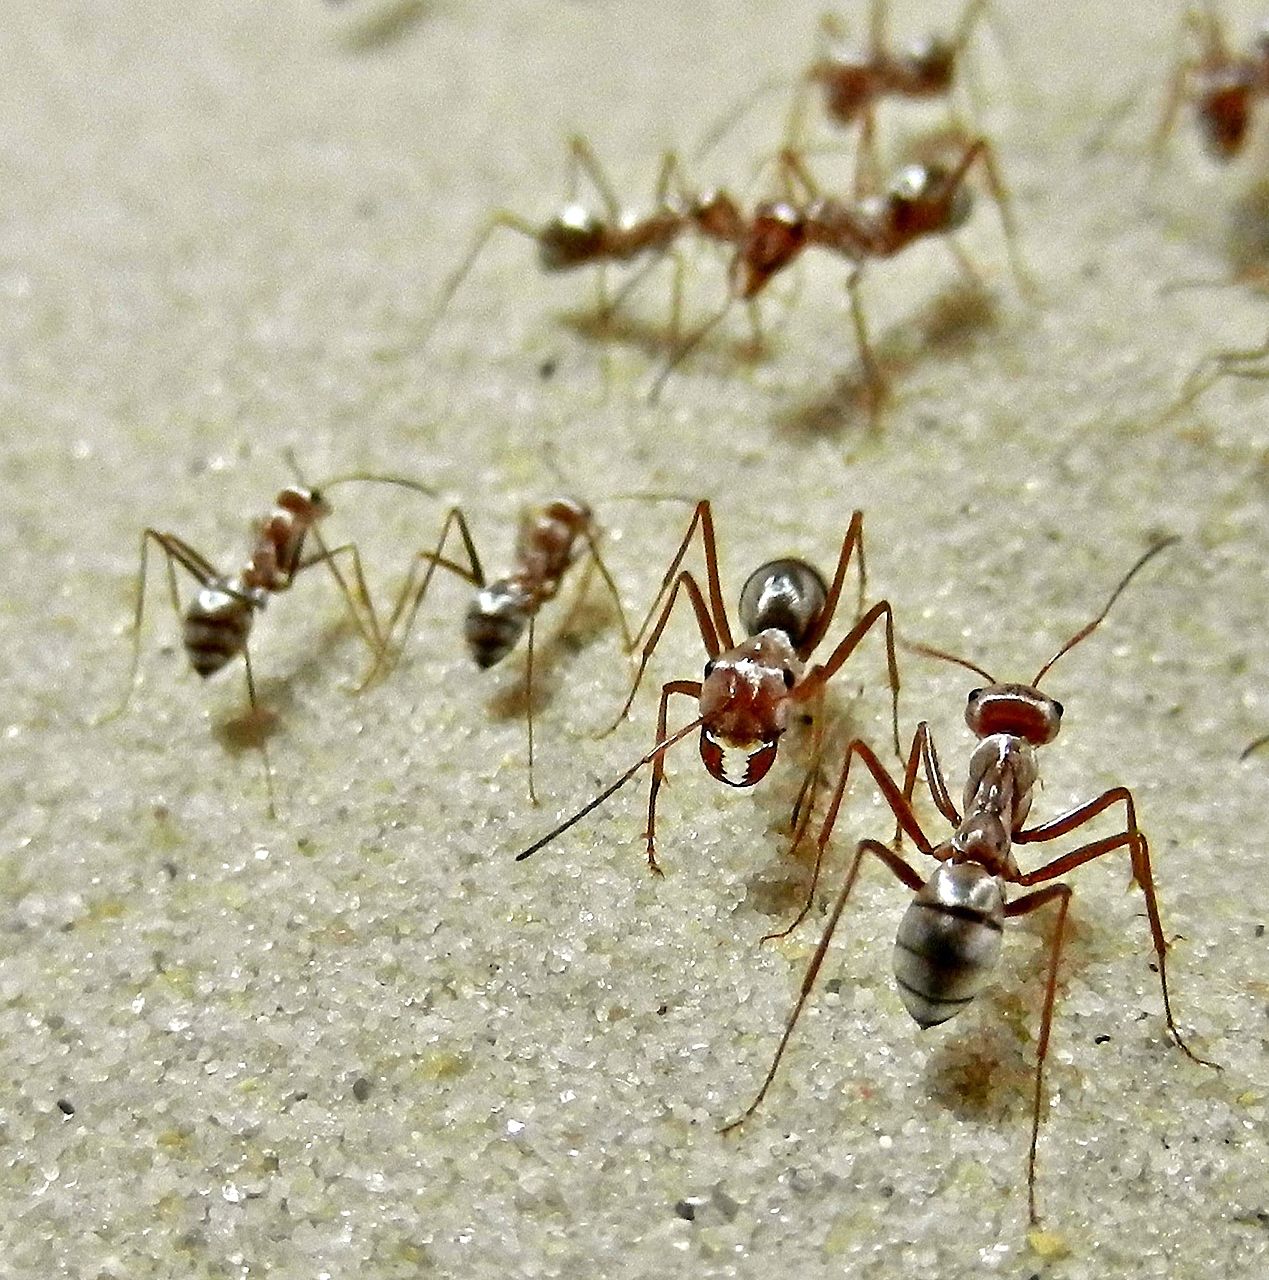 Sahara silver ants, Cataglyphis bombycina, with their shiny, heat-reflecting hair coat. Body length about 1cm